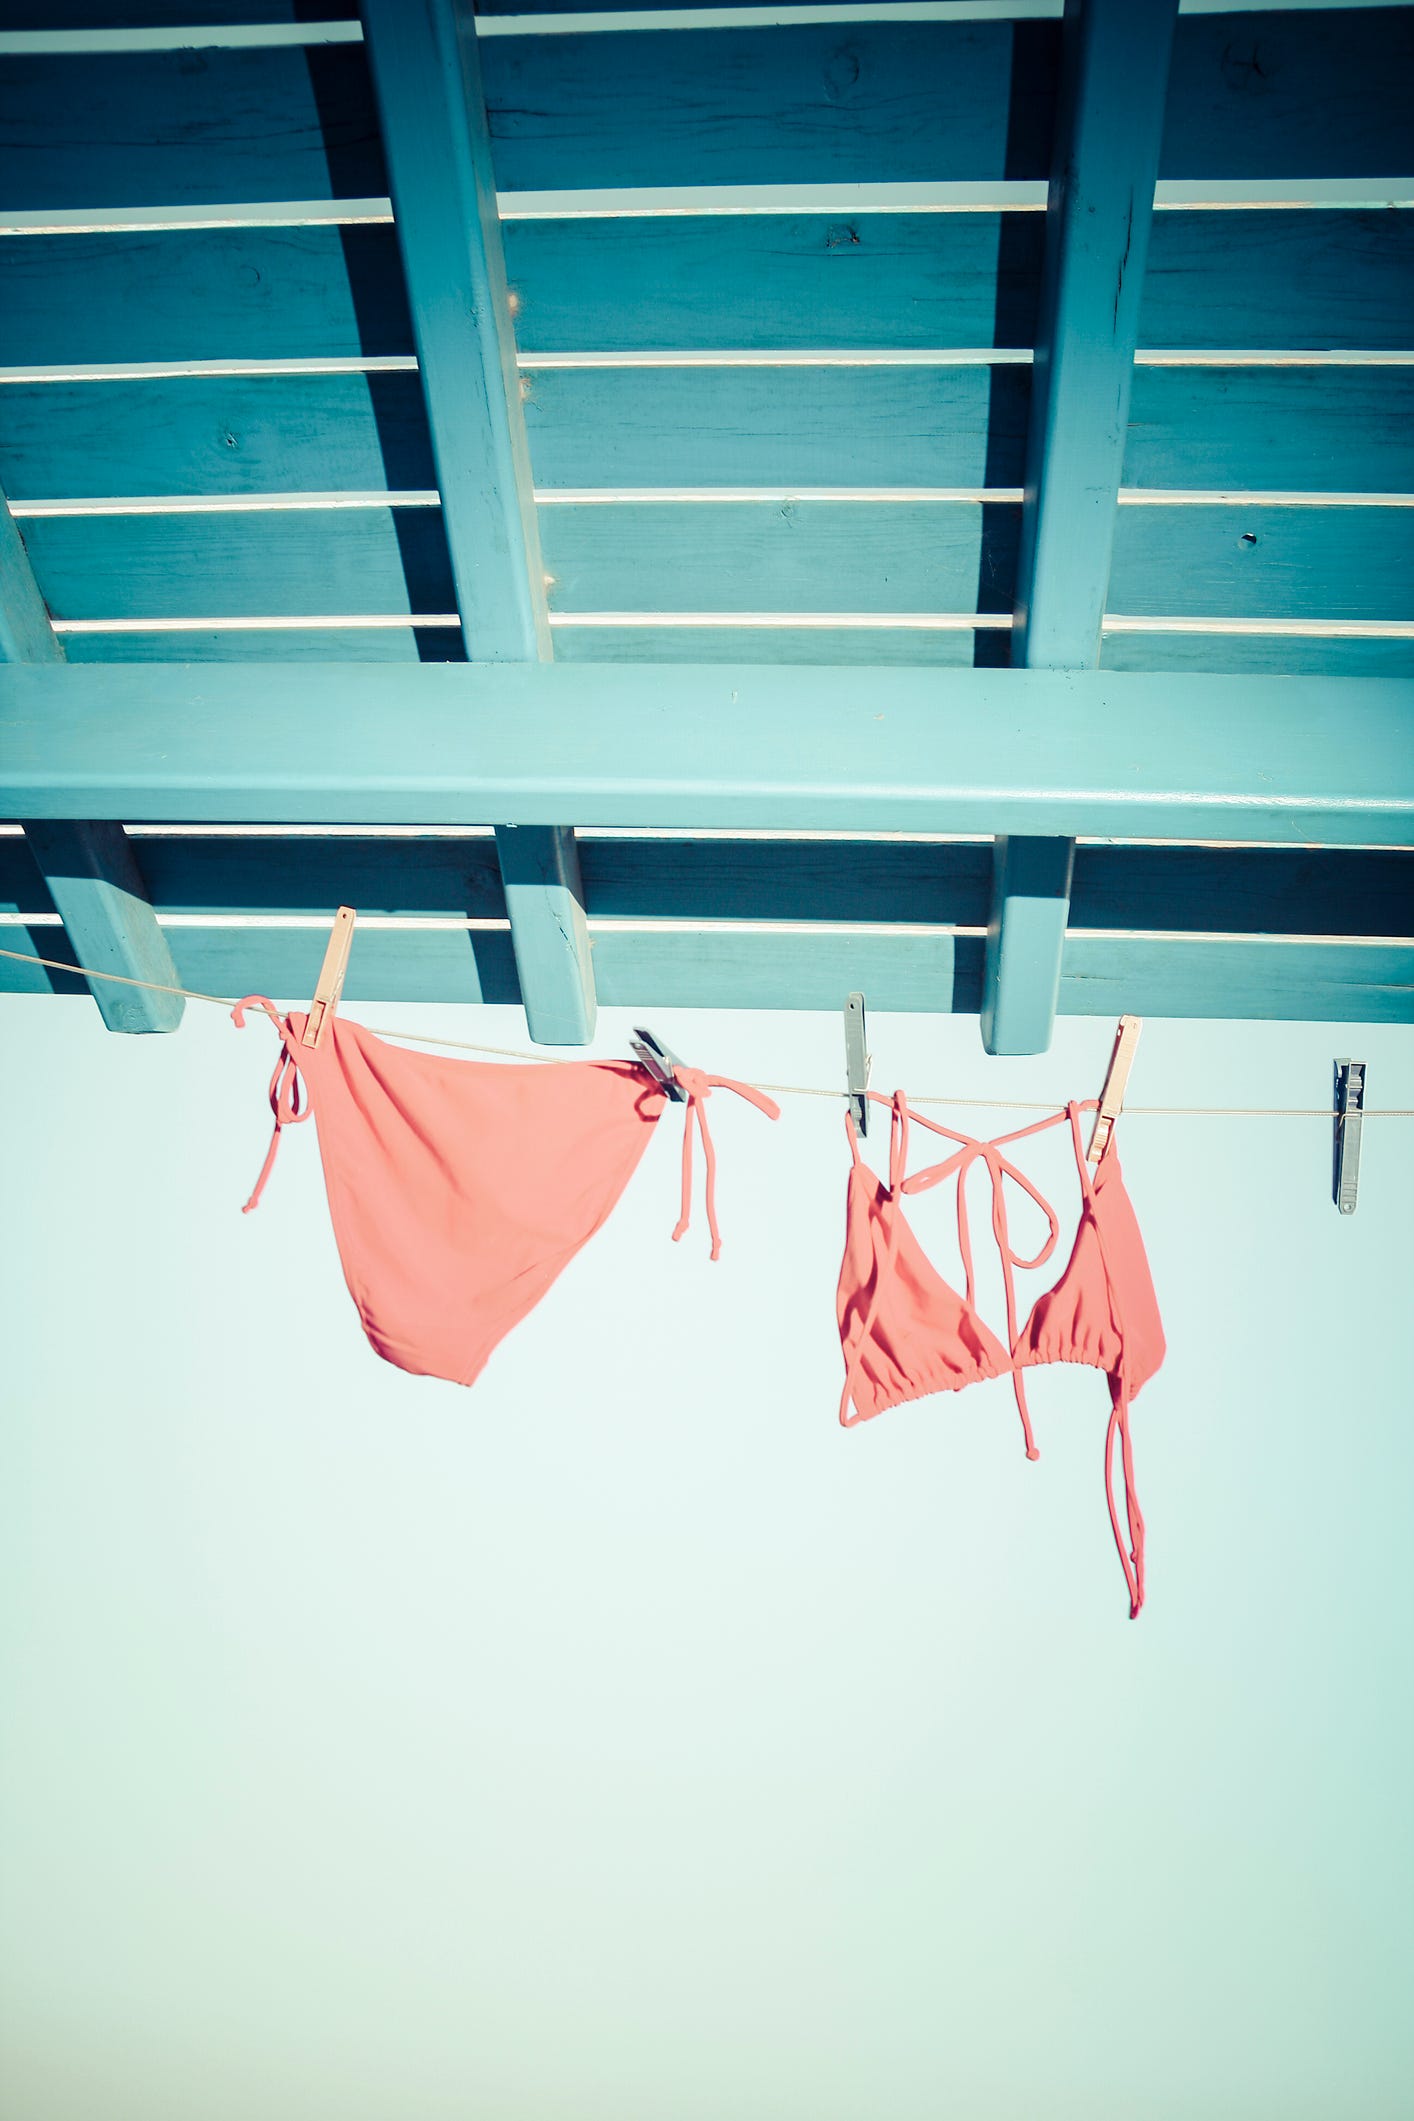 Laundry, Turquoise, Clothes hanger, Pink, Room, Line, Window, Undergarment, 